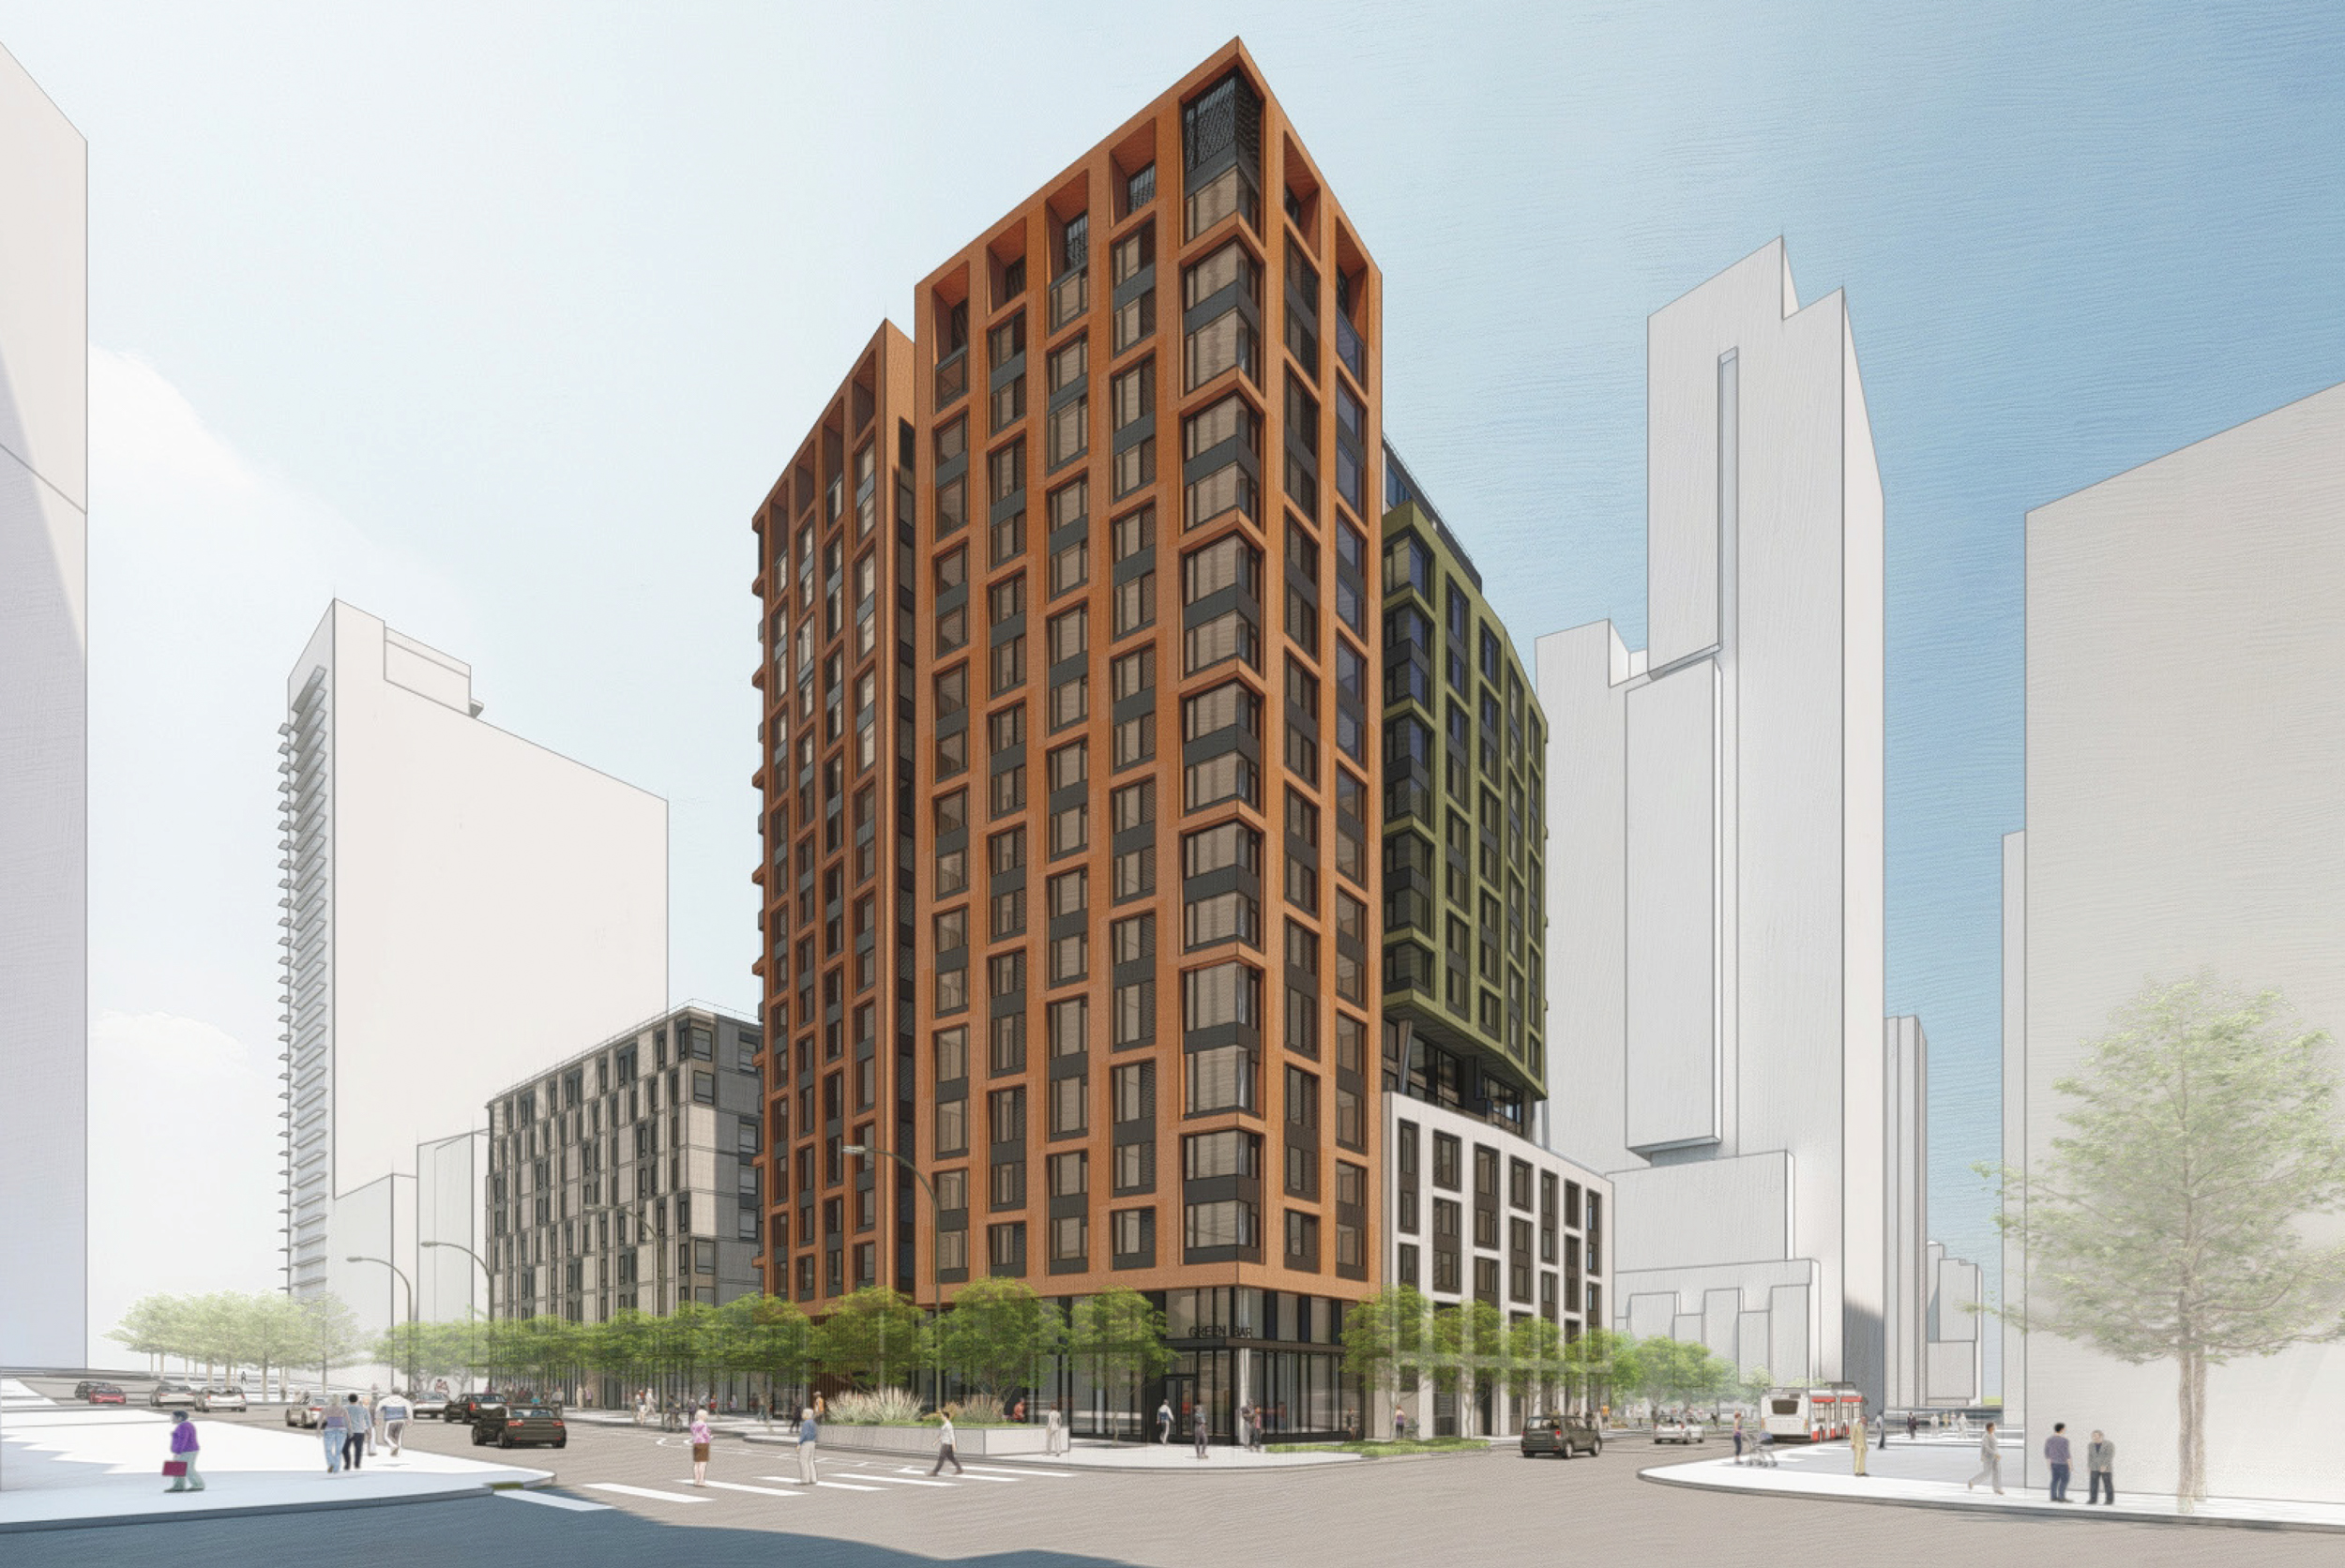 Transbay Block 2 East establishing view, rendering by Kennerly Architecture & Planning